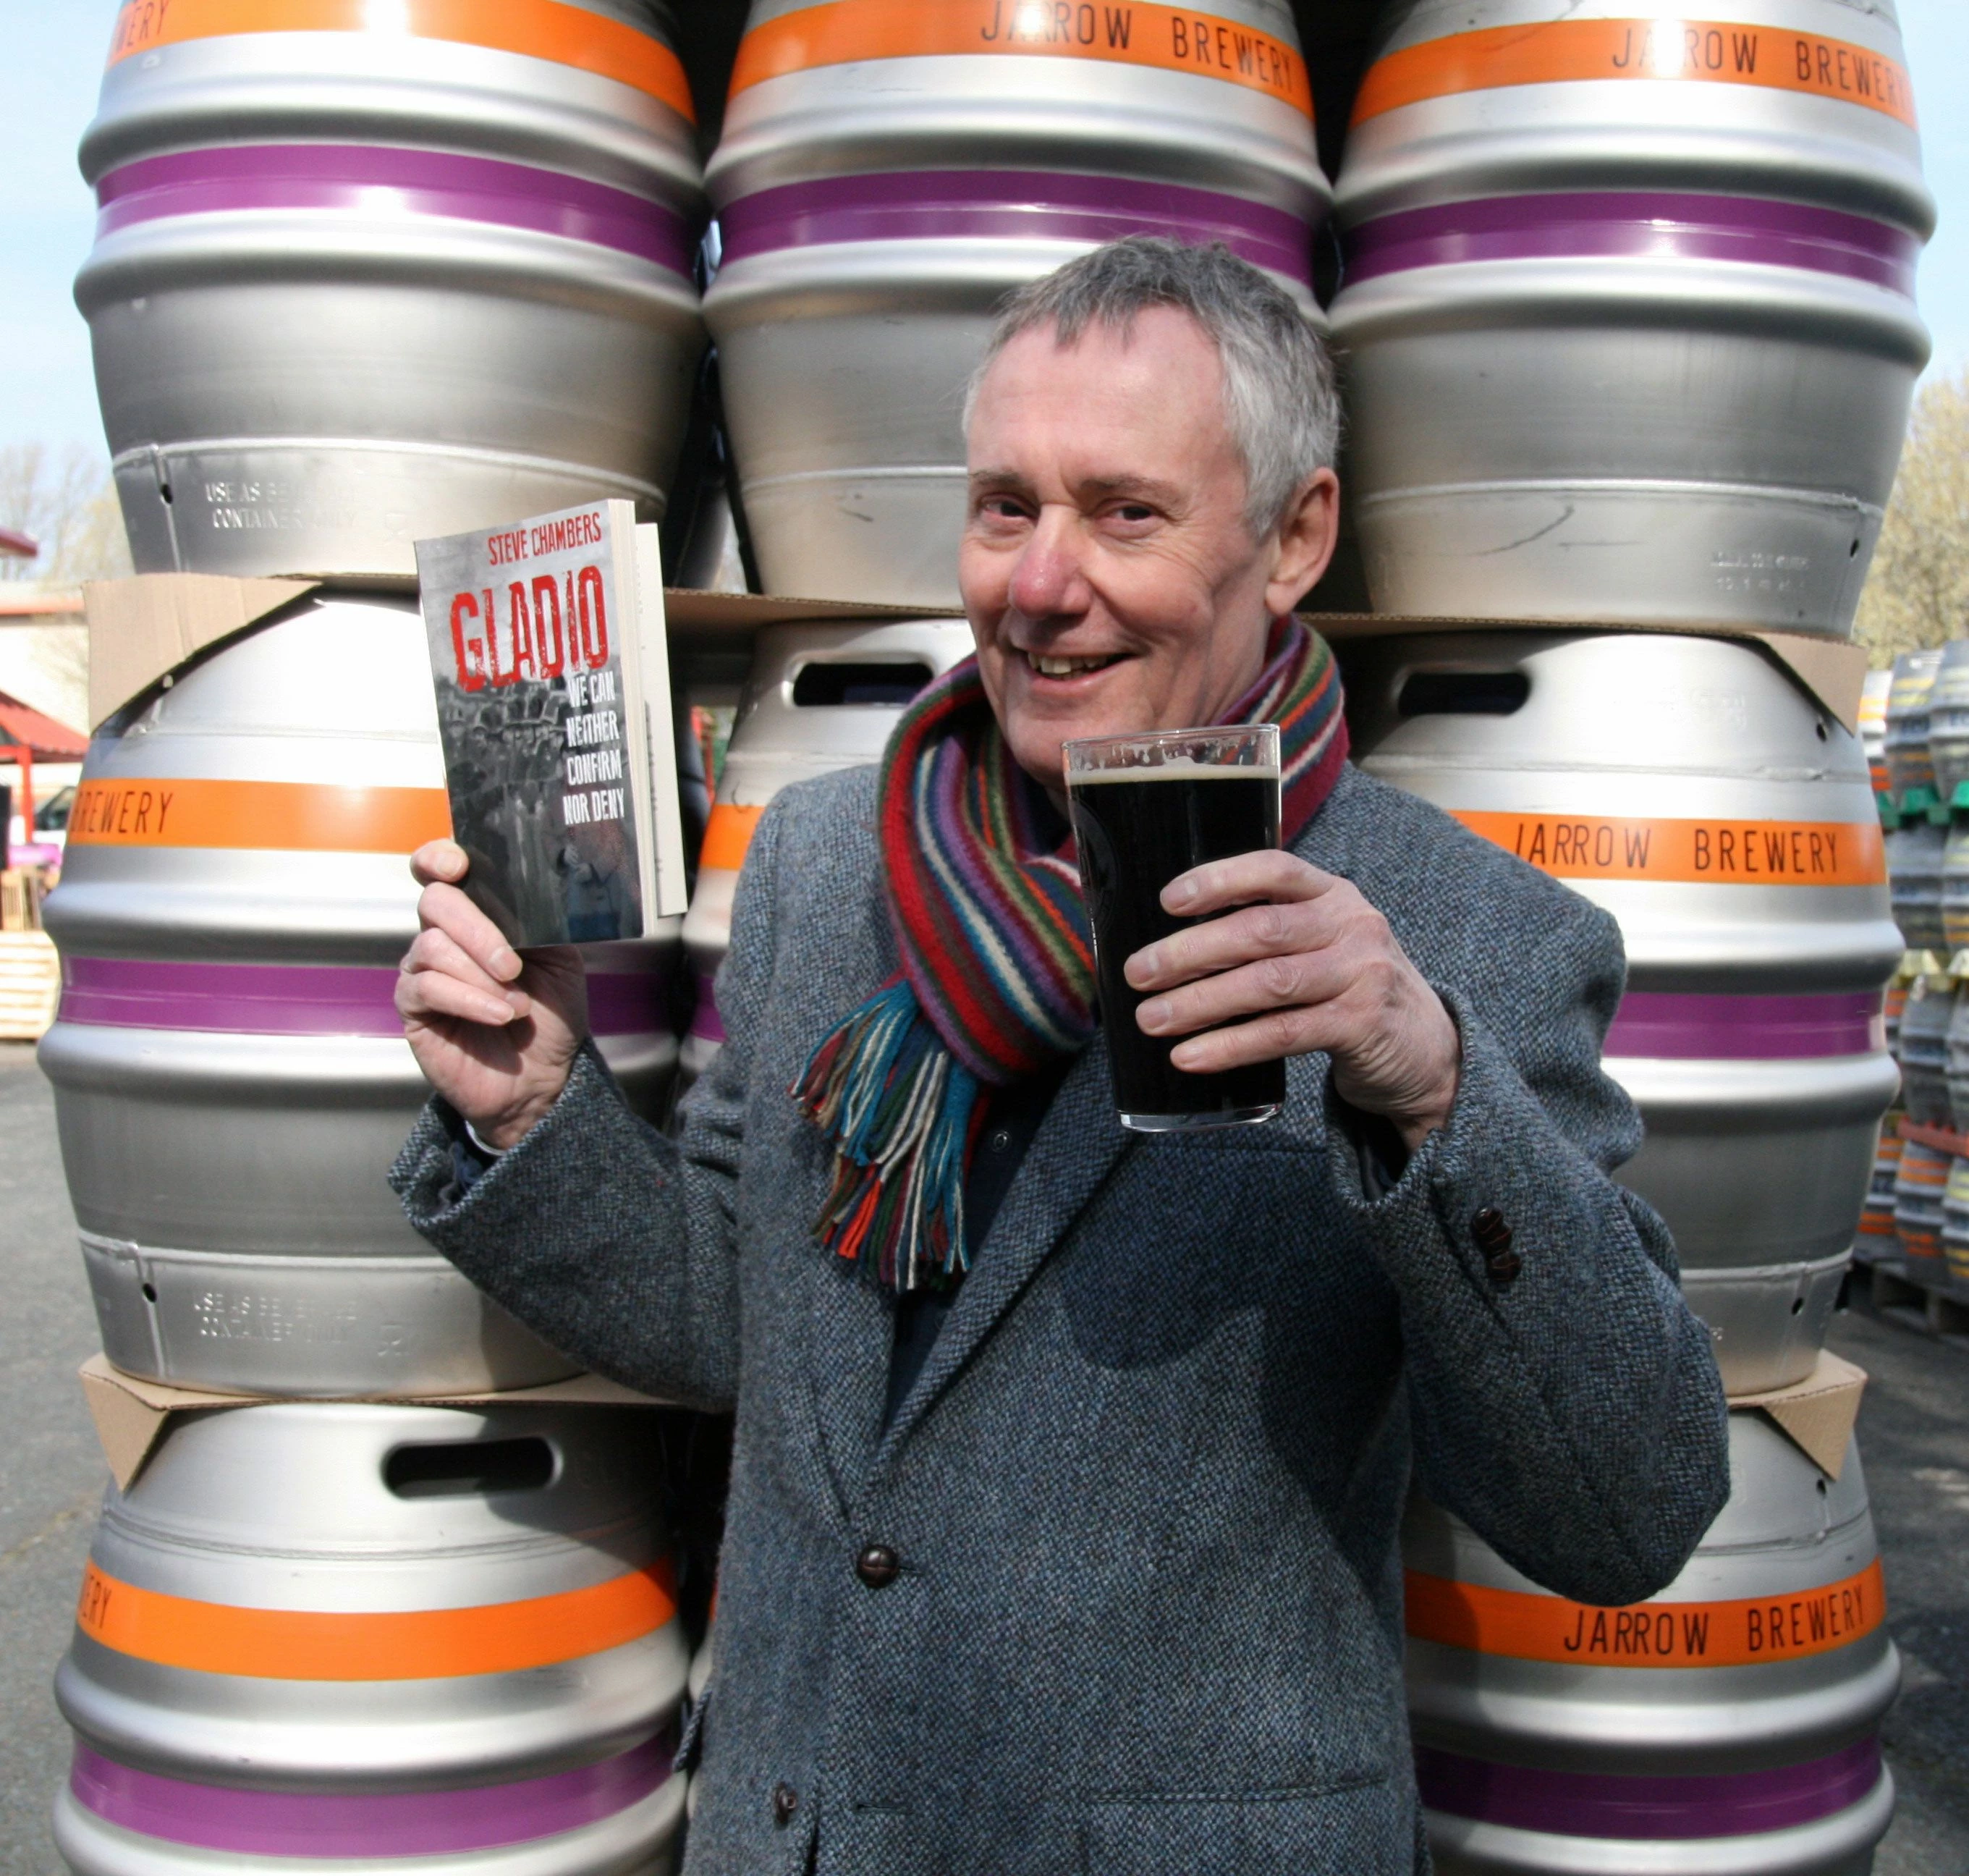 Steve Chambers at Jarrow Brewery with Gladio the book and Gladio the beer